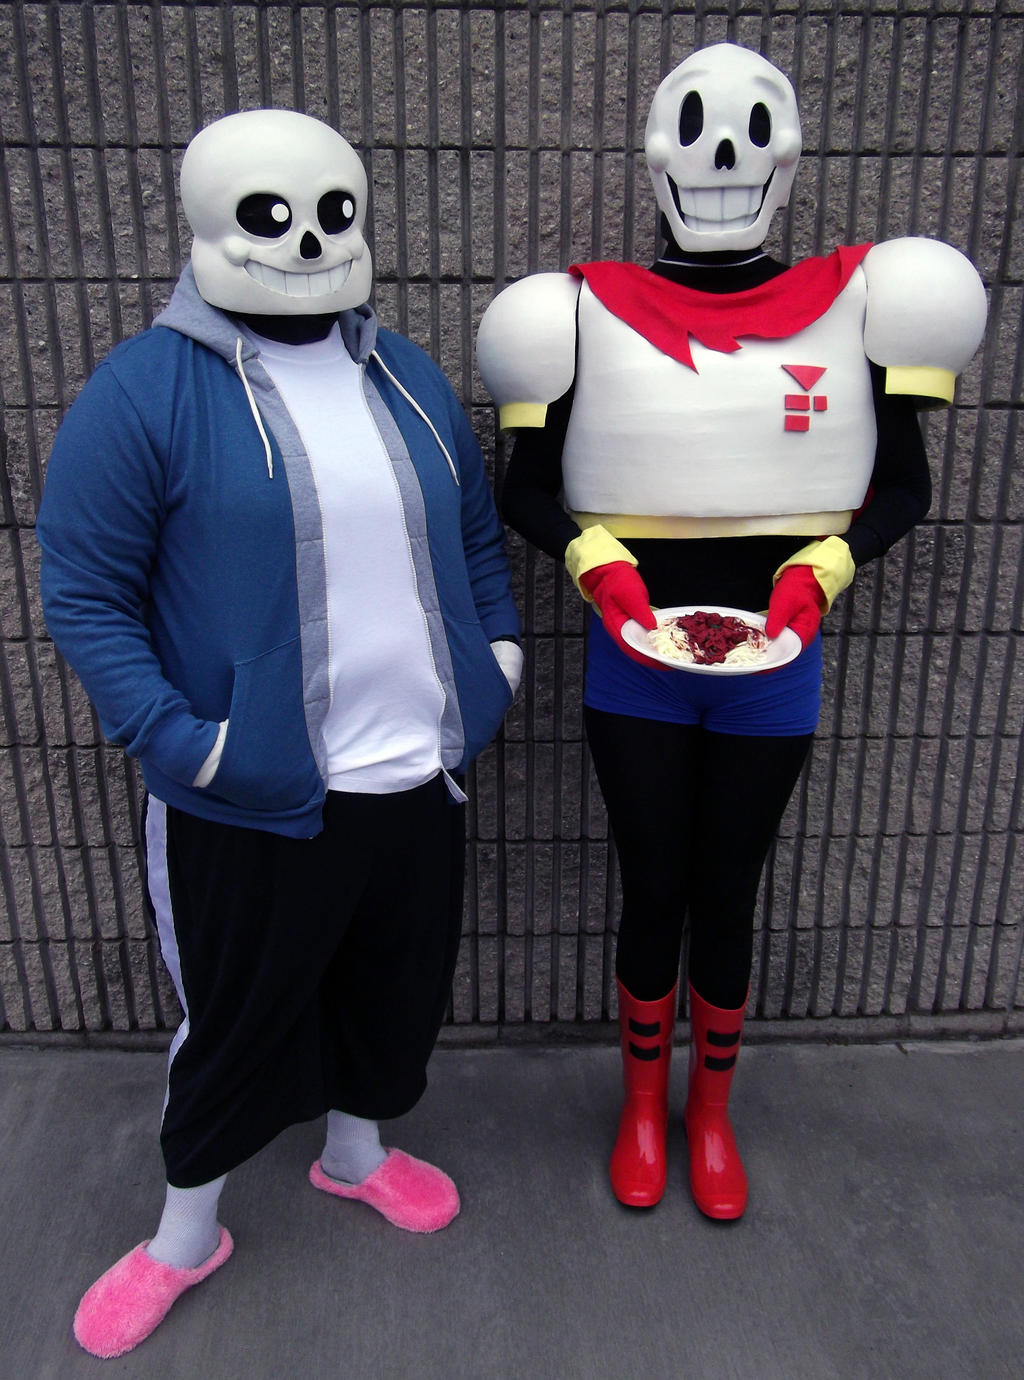 Sans and Papyrus Cosplay by Proto012 on DeviantArt